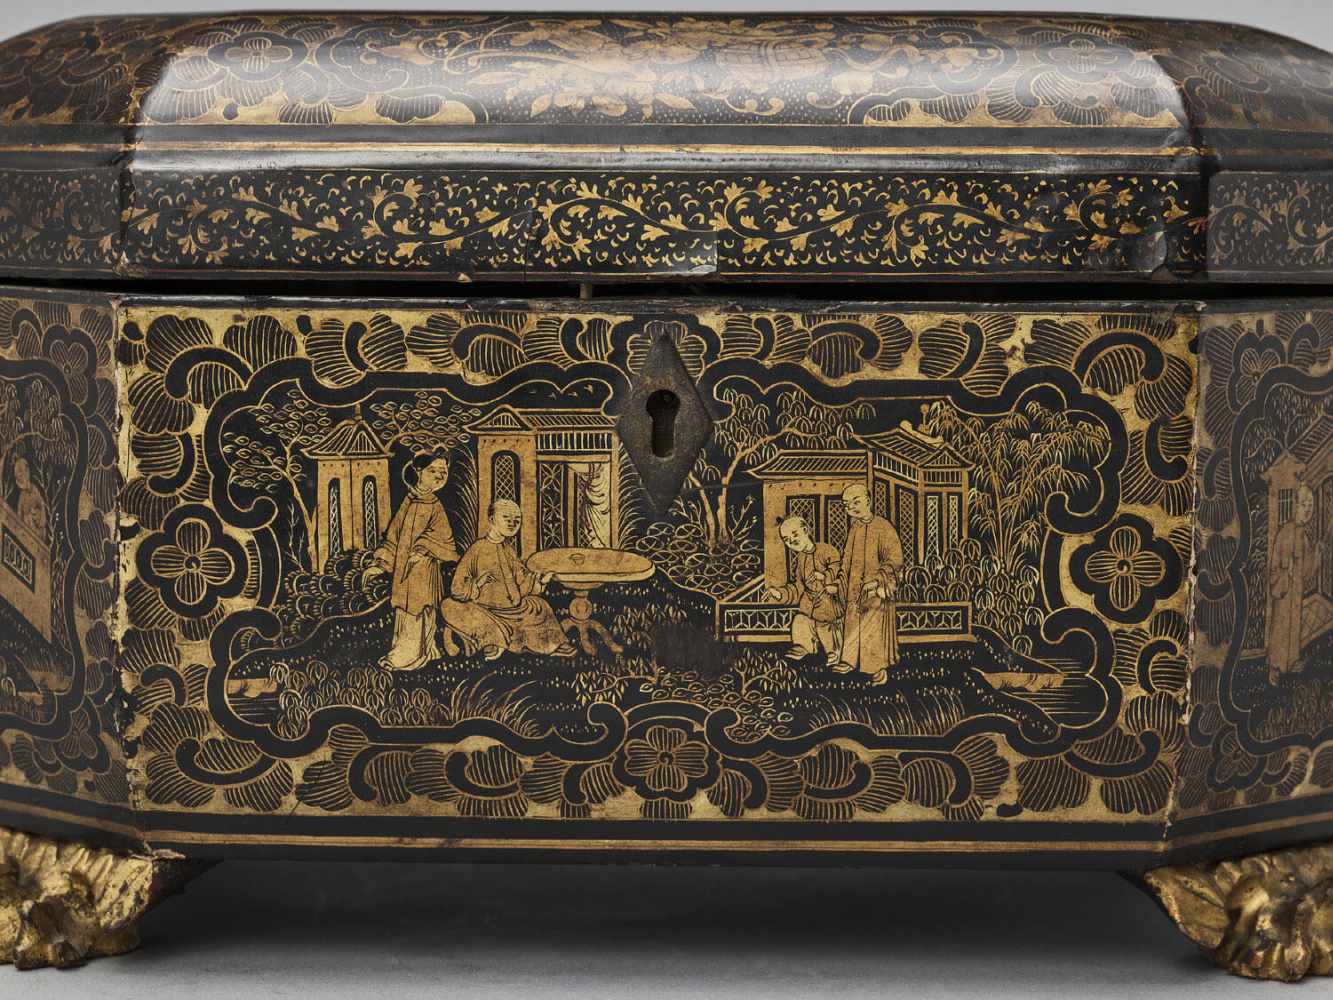 A CANTON LACQUER HEXAGONAL TEA CADDY WITH ORIGINAL TEA CONTAINERS, QING - Image 4 of 8